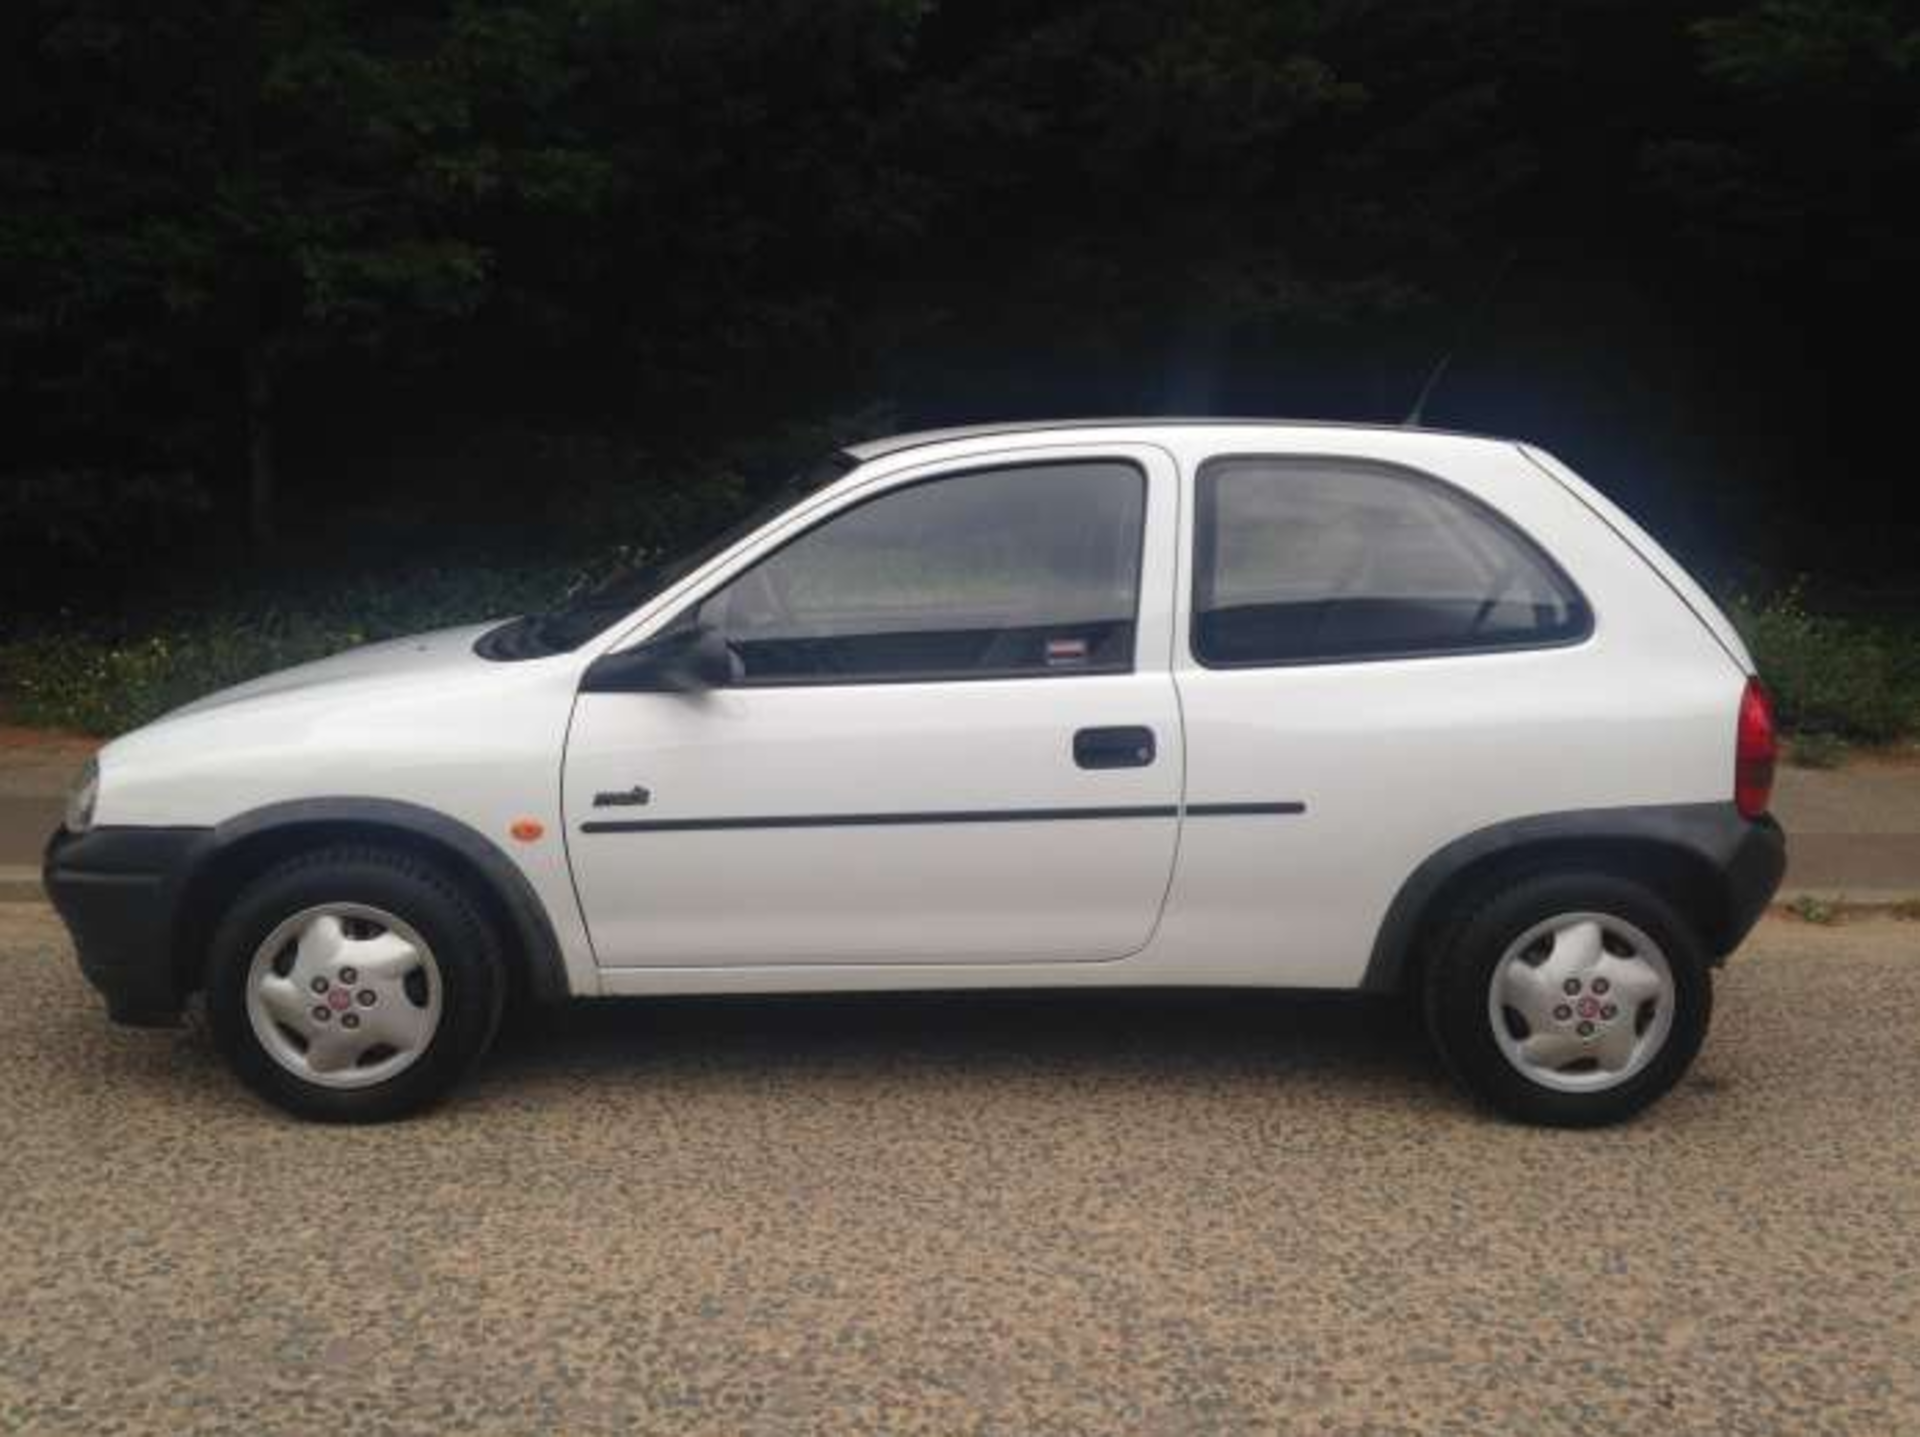 1995 Vauxhall Corsa, 1.4 Auto - 17'200 miles. One owner from new. - Image 2 of 14